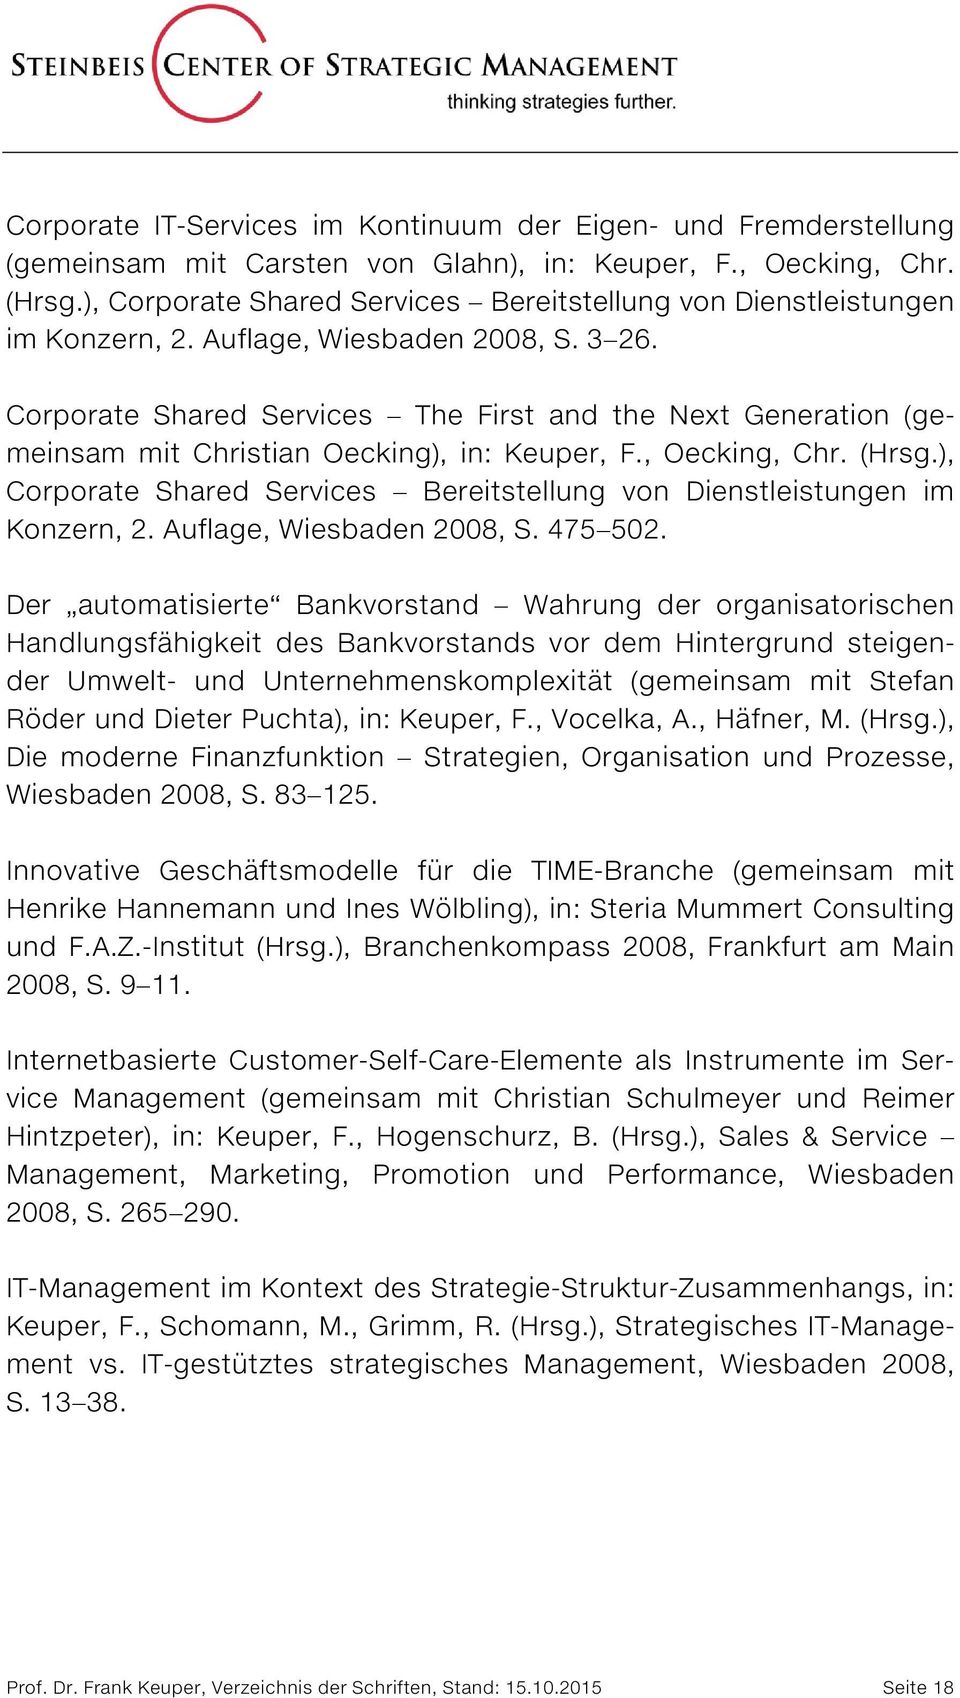 Corporate Shared Services The First and the Next Generation (gemeinsam mit Christian Oecking), in: Keuper, F., Oecking, Chr. (Hrsg.